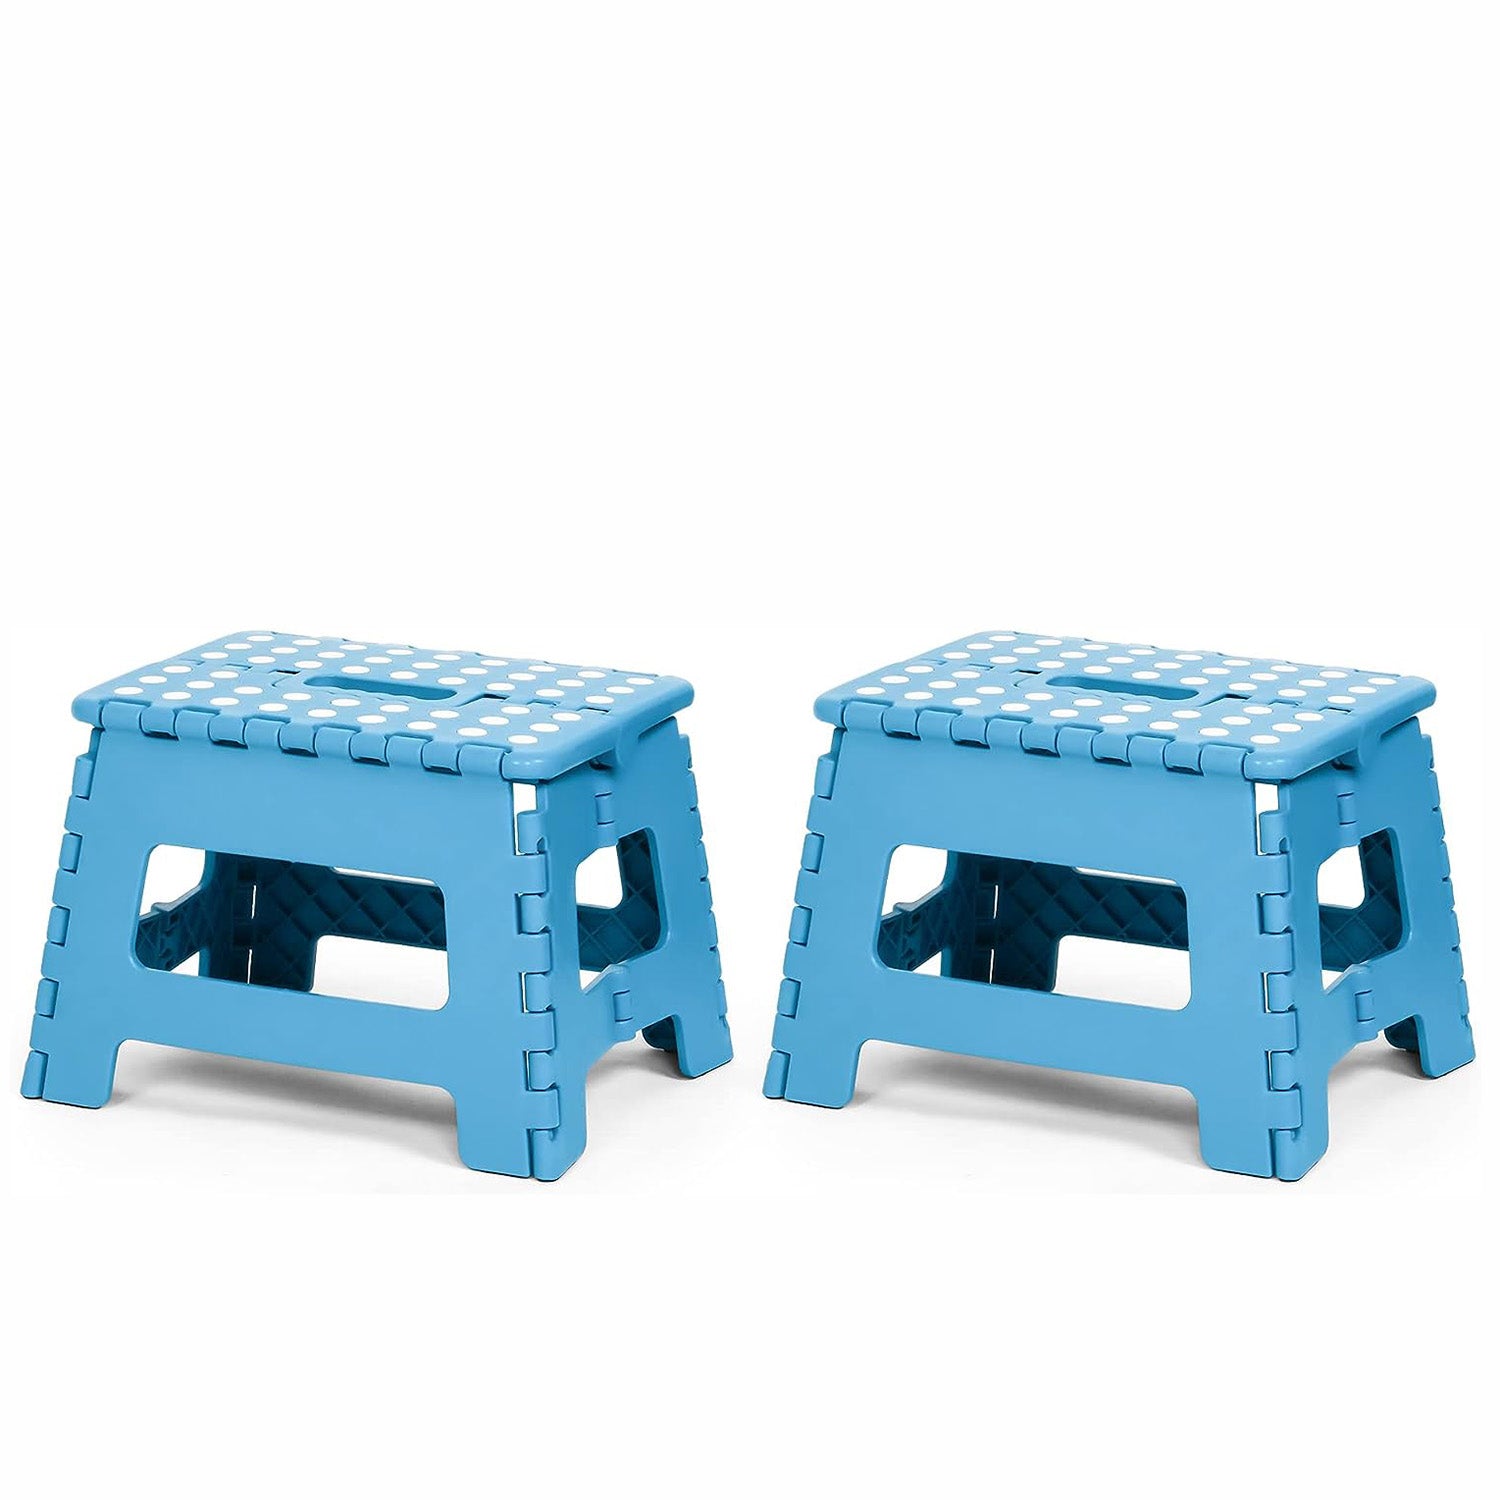 Set of 2 Folding Step Stool 8.7" with Non-Slip Surface and Portable Handle, Blue